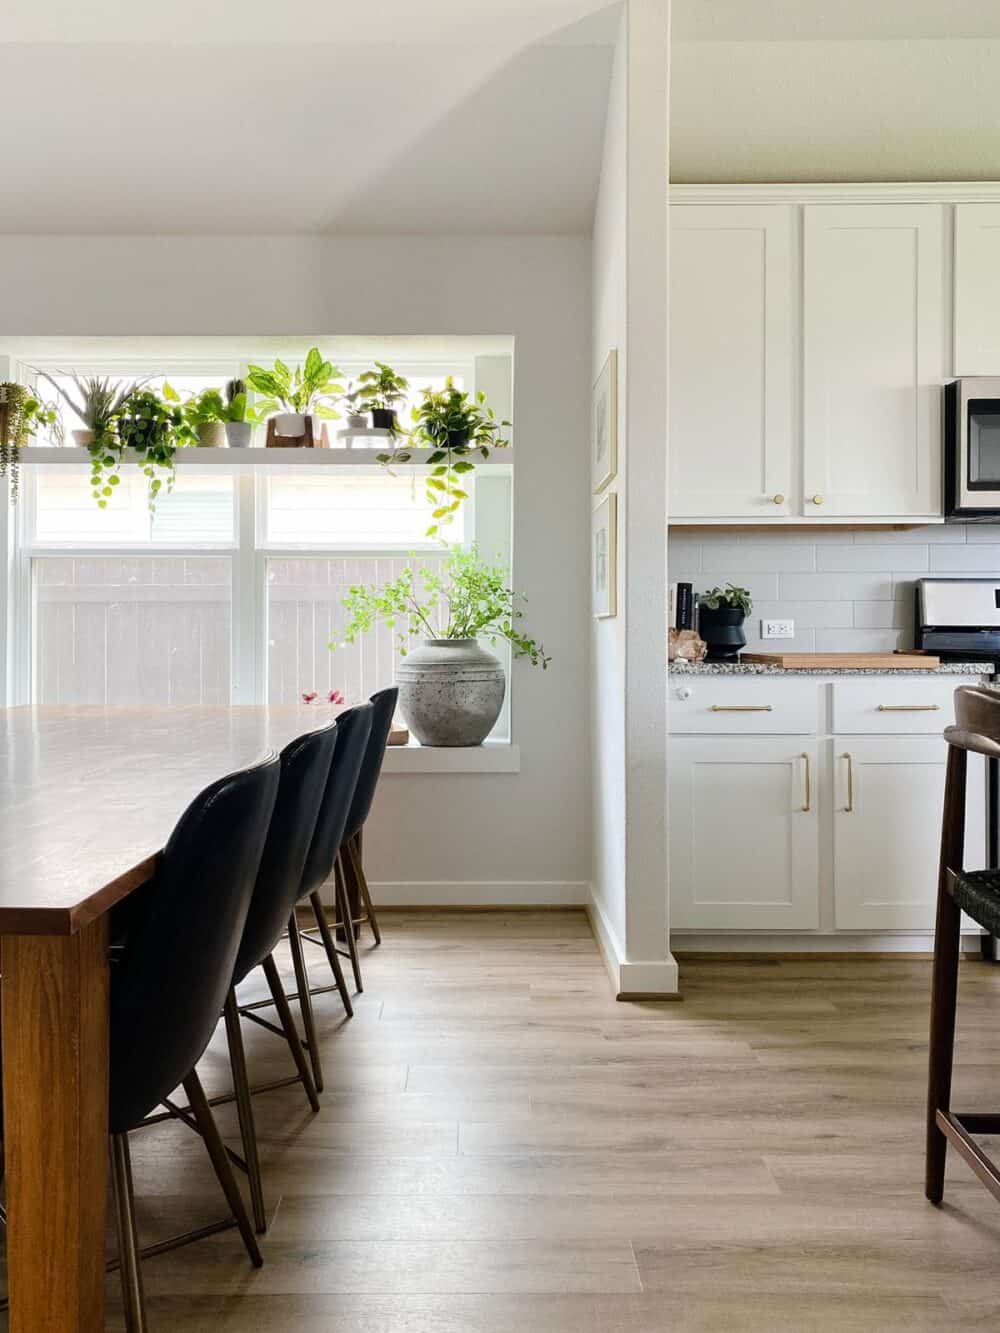 A bright, neutral kitchen and dining space 